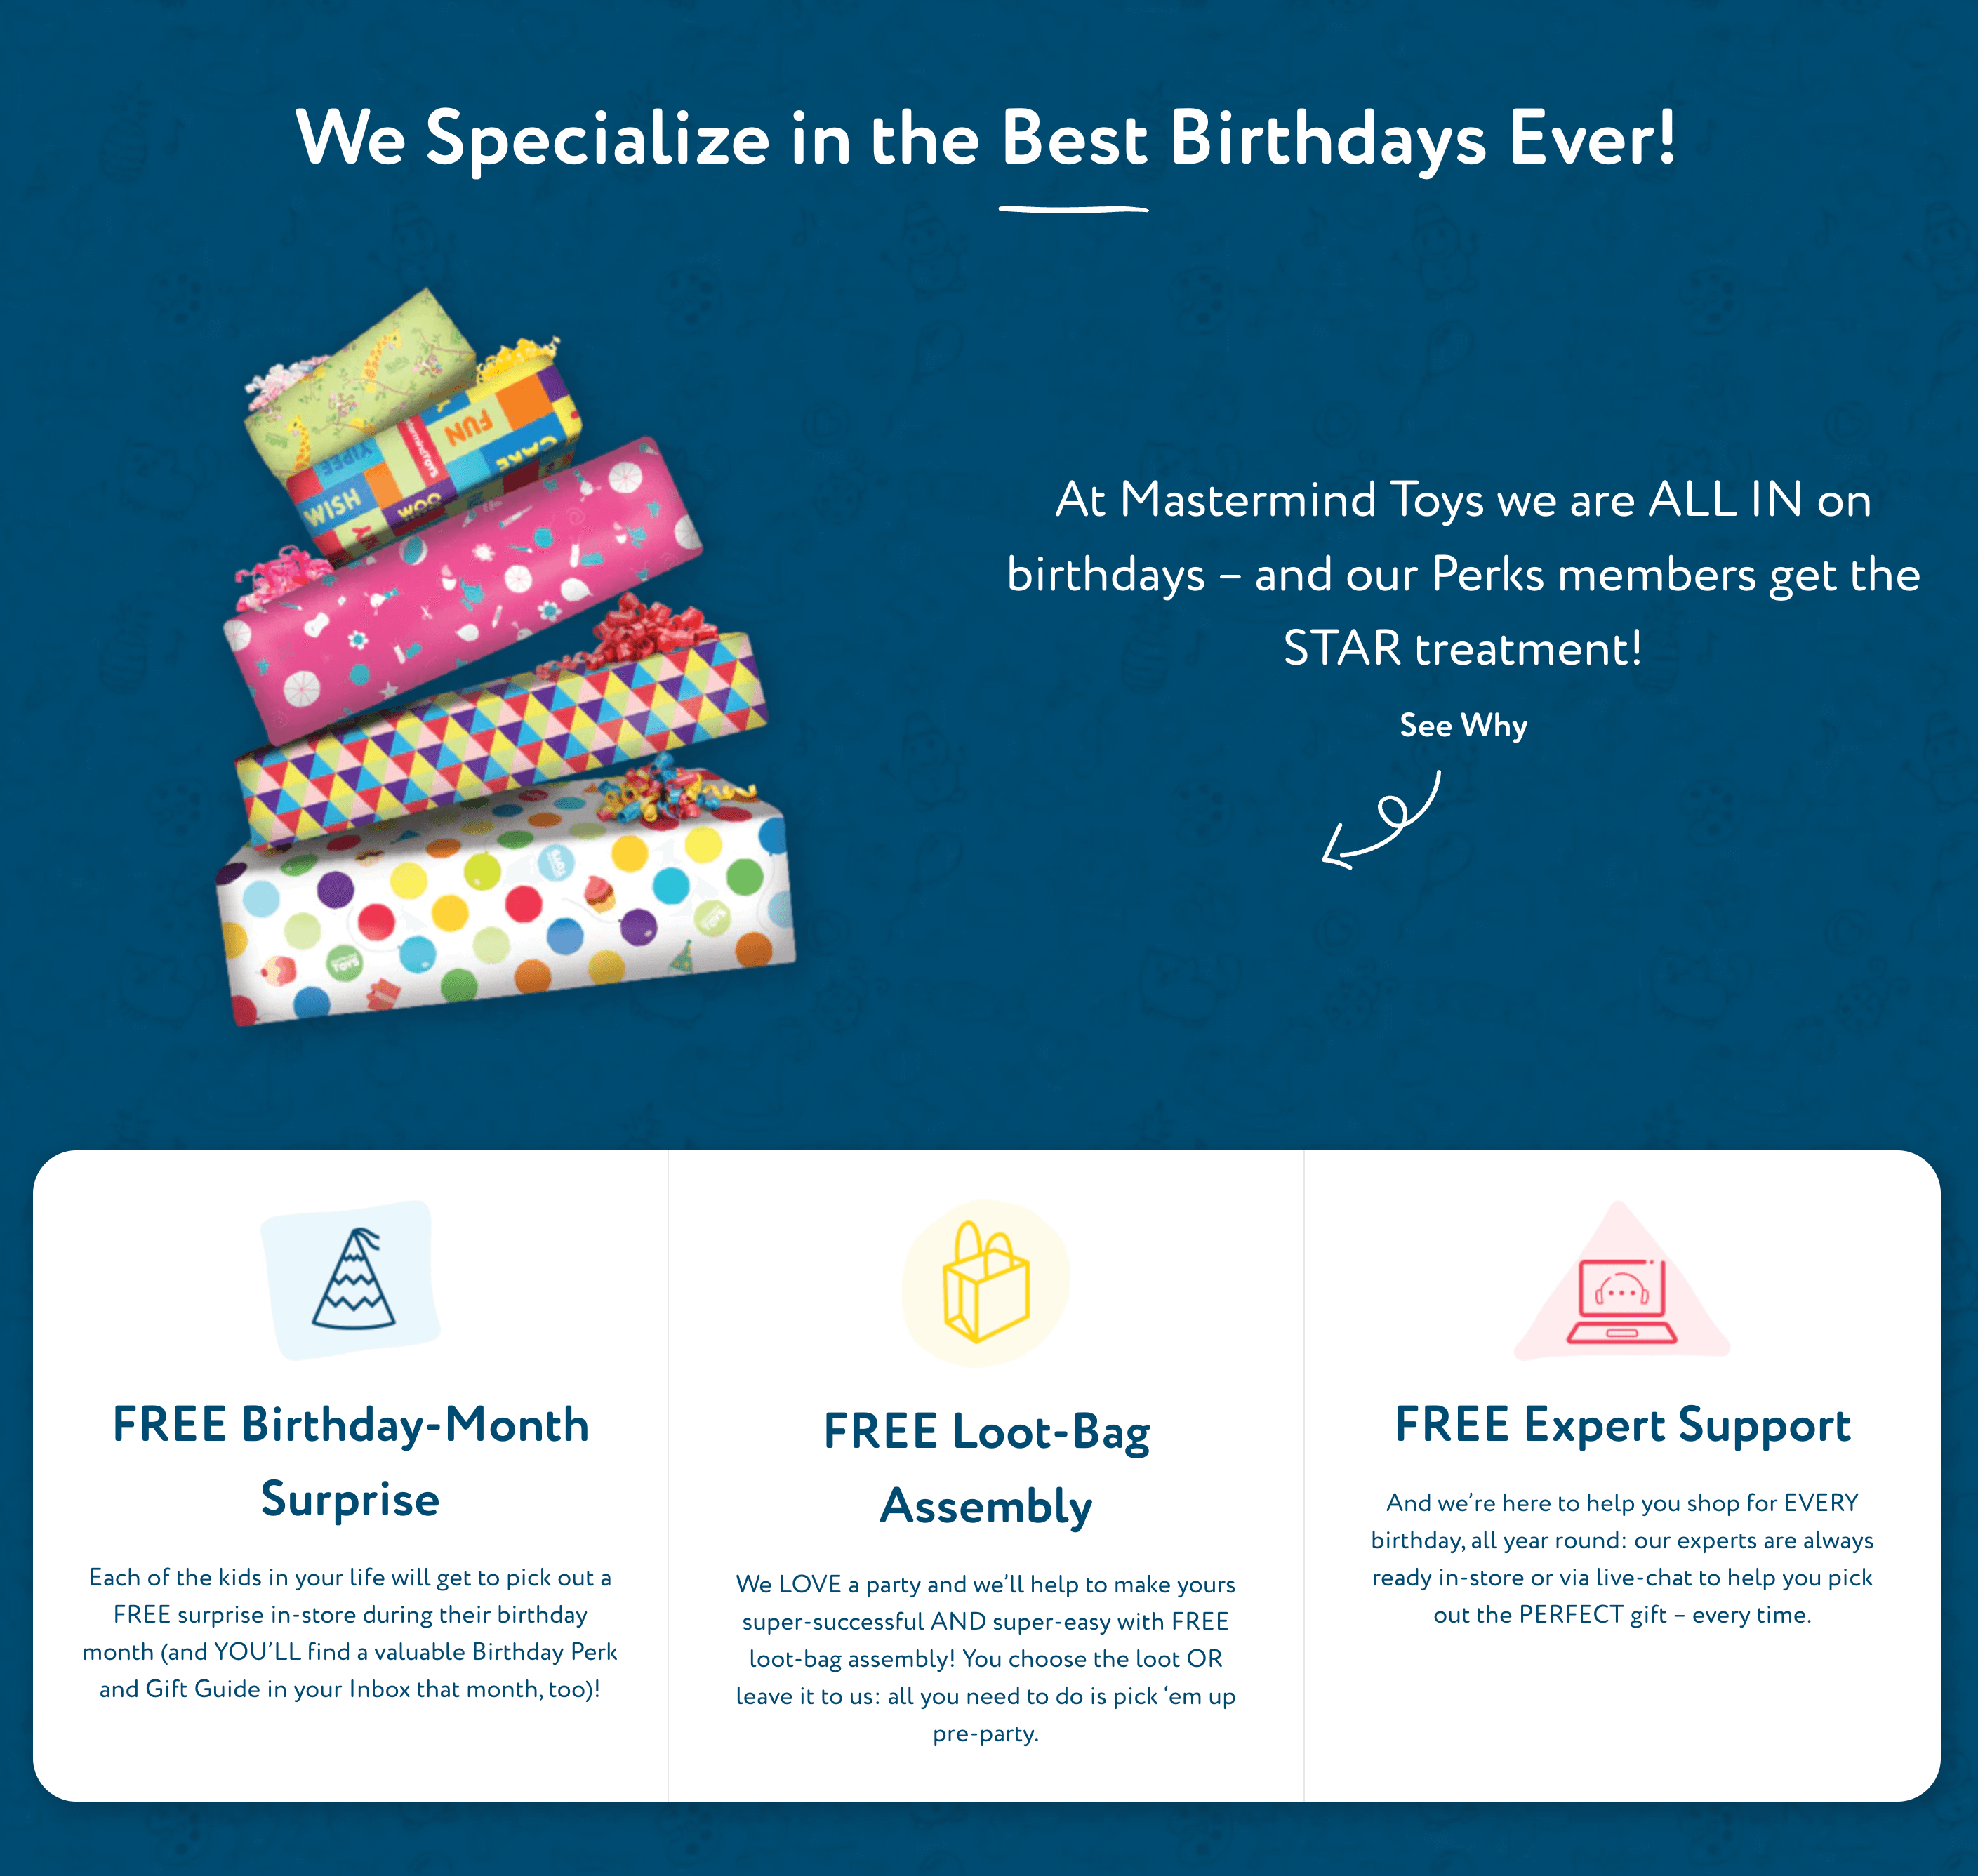 A screenshot from Mastermind Toys’ Perks rewards program explainer page. It is titled “We Specialize in the Best Birthdays Ever!” and lists three birthday benefits—free birthday-month surprises, free loot-bag assembly, and free expert support.